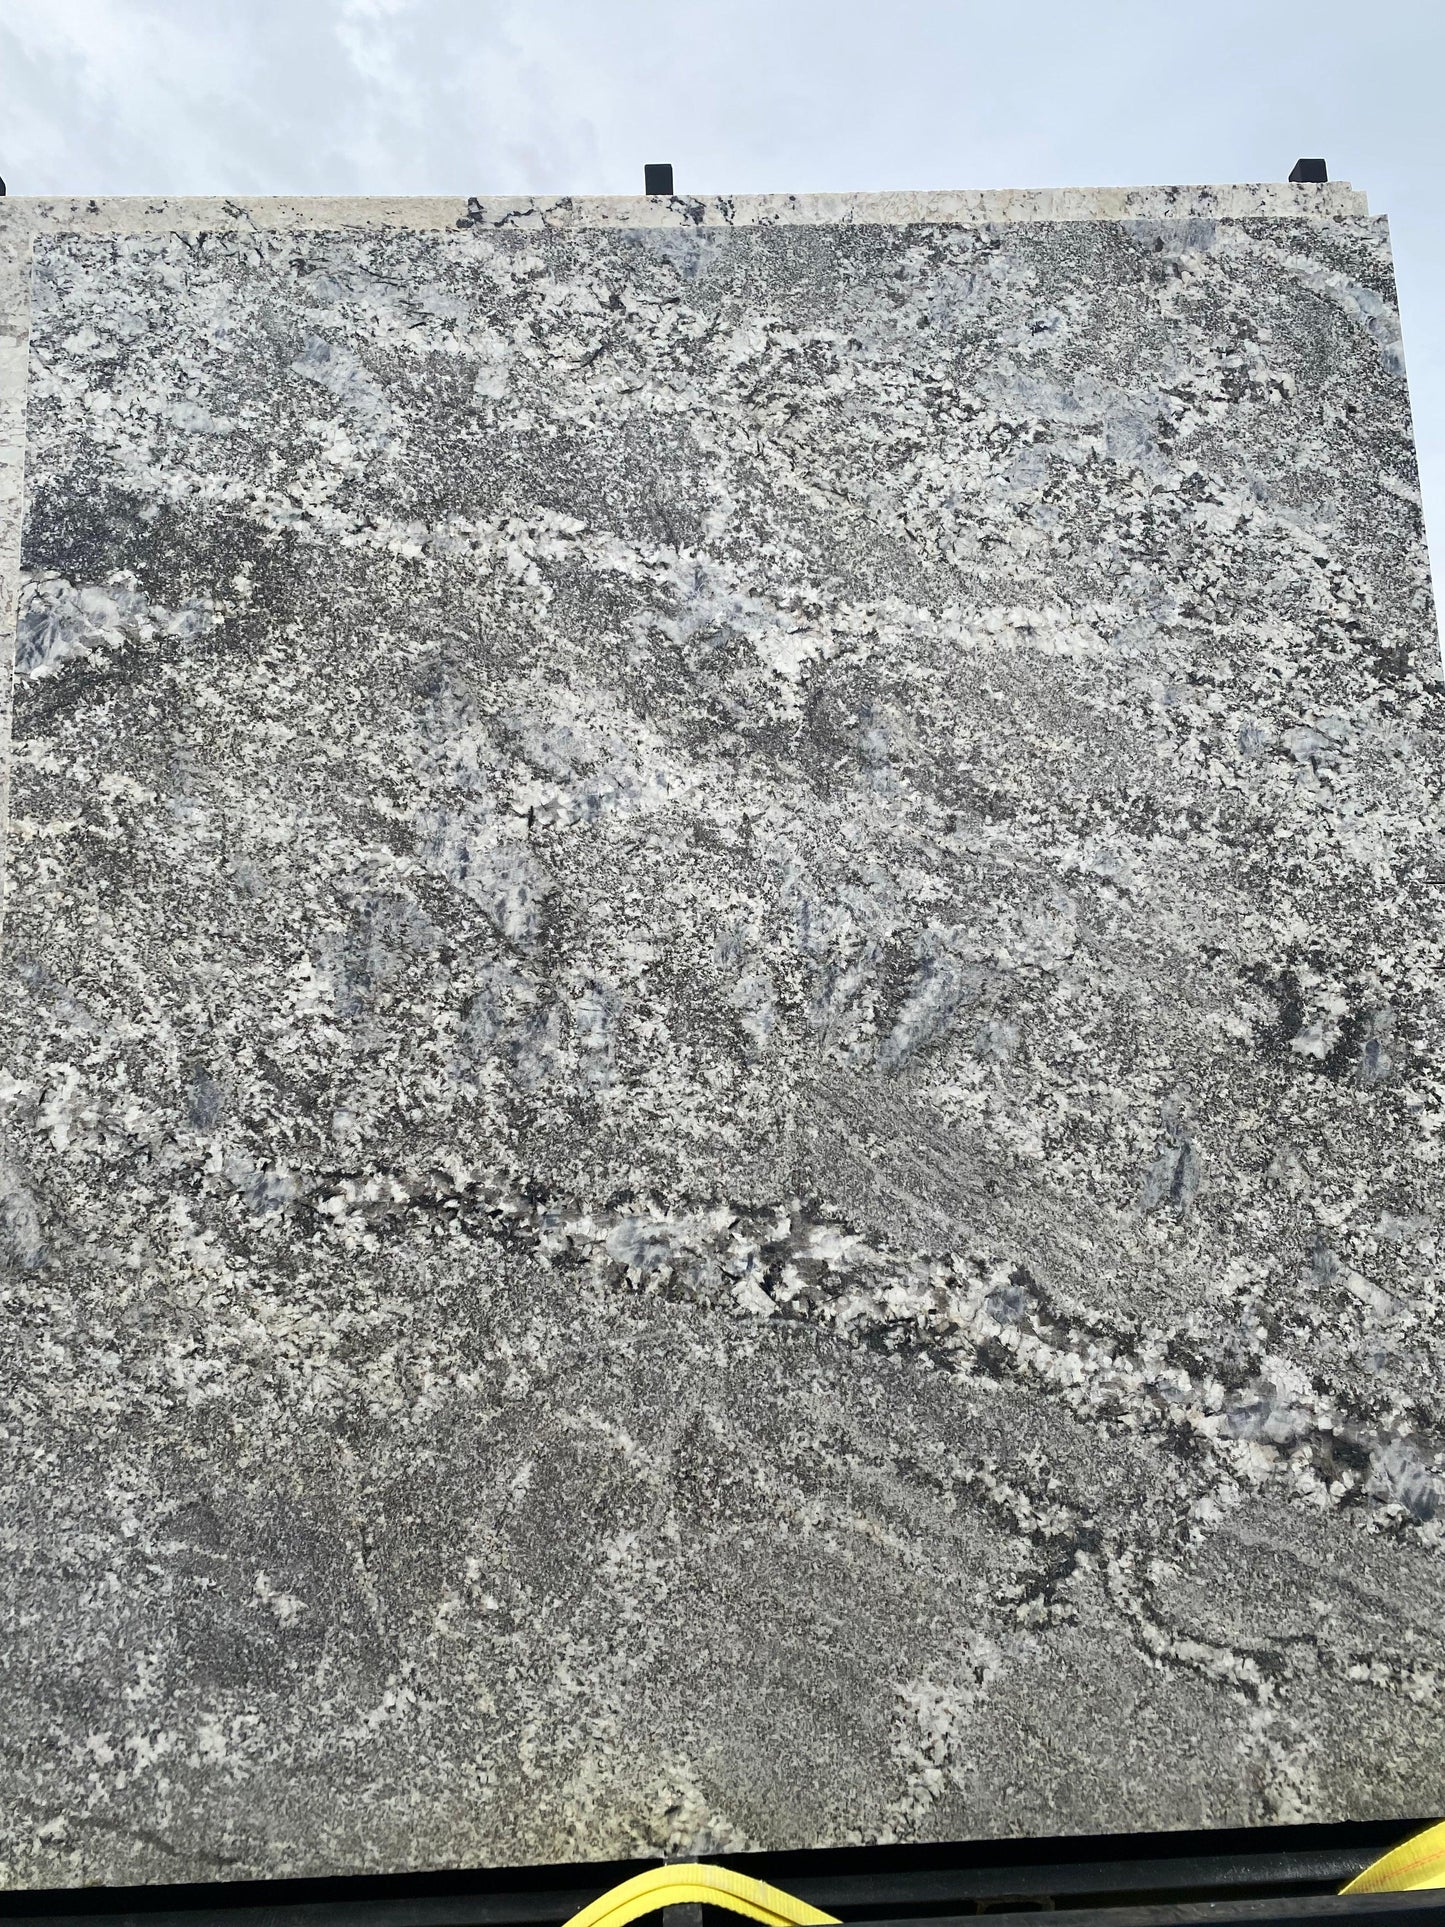 2cm, cream, Crystals, Flecks, Glossy, Granite, gray, Grey, Outlet Material, Pecks, Rare Find, Remnant, remnants, Single, thickness-2cm Granite Remnant